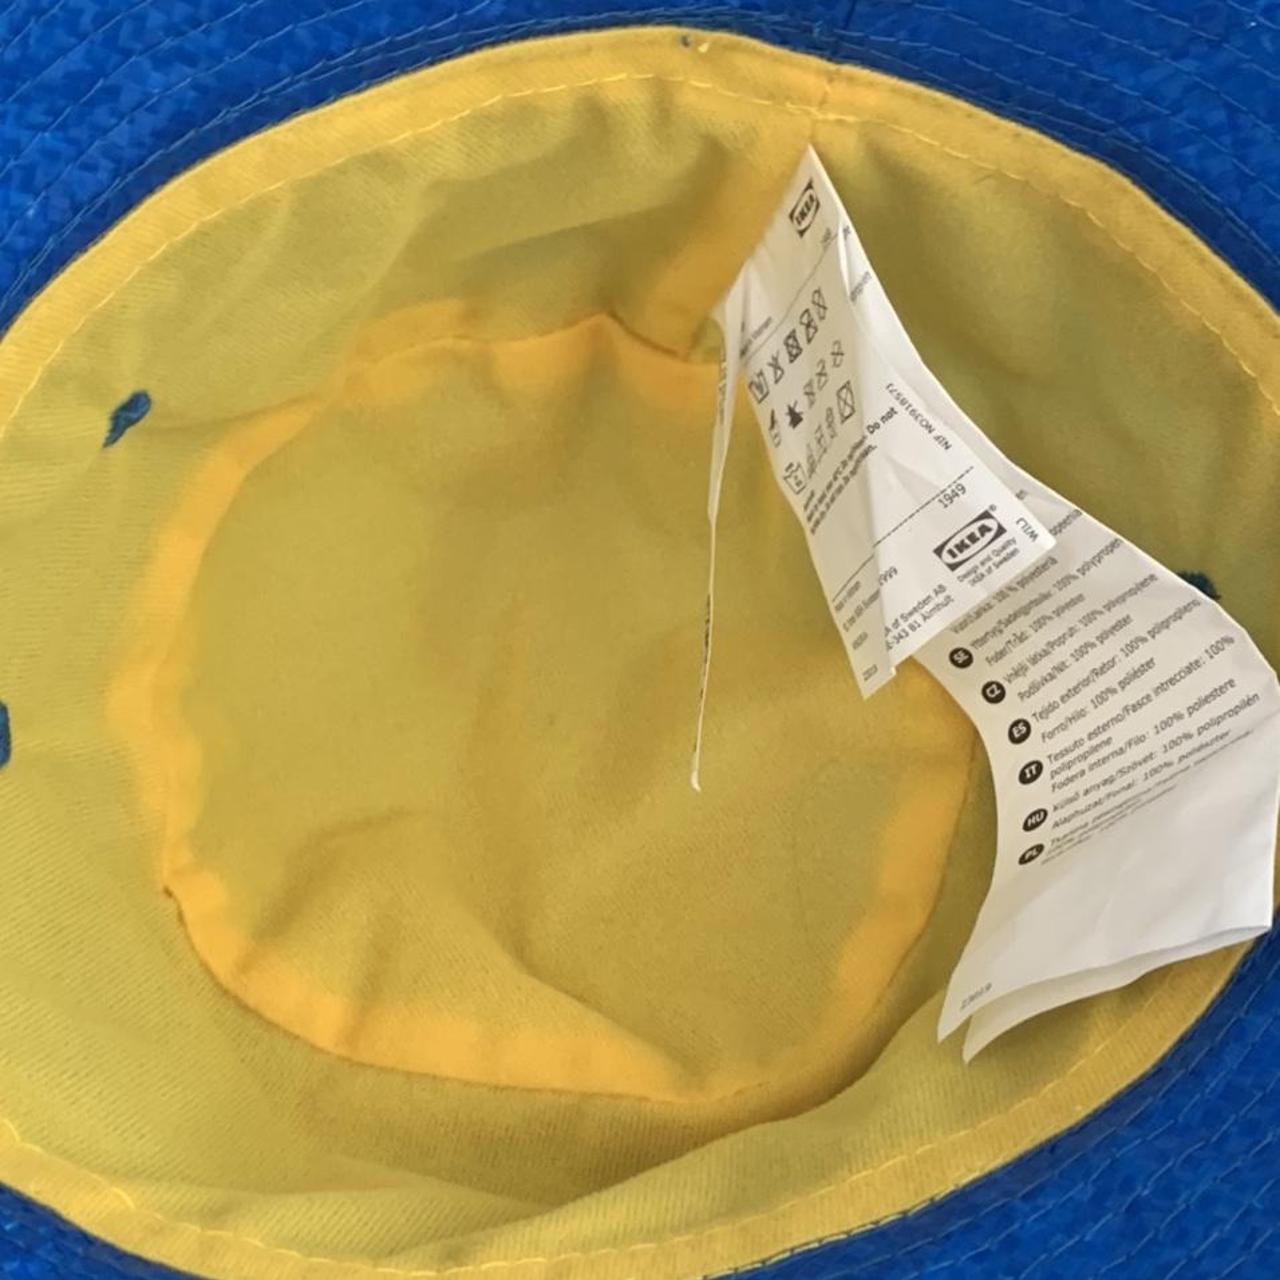 IKEA Women's Yellow and Blue Hat (4)